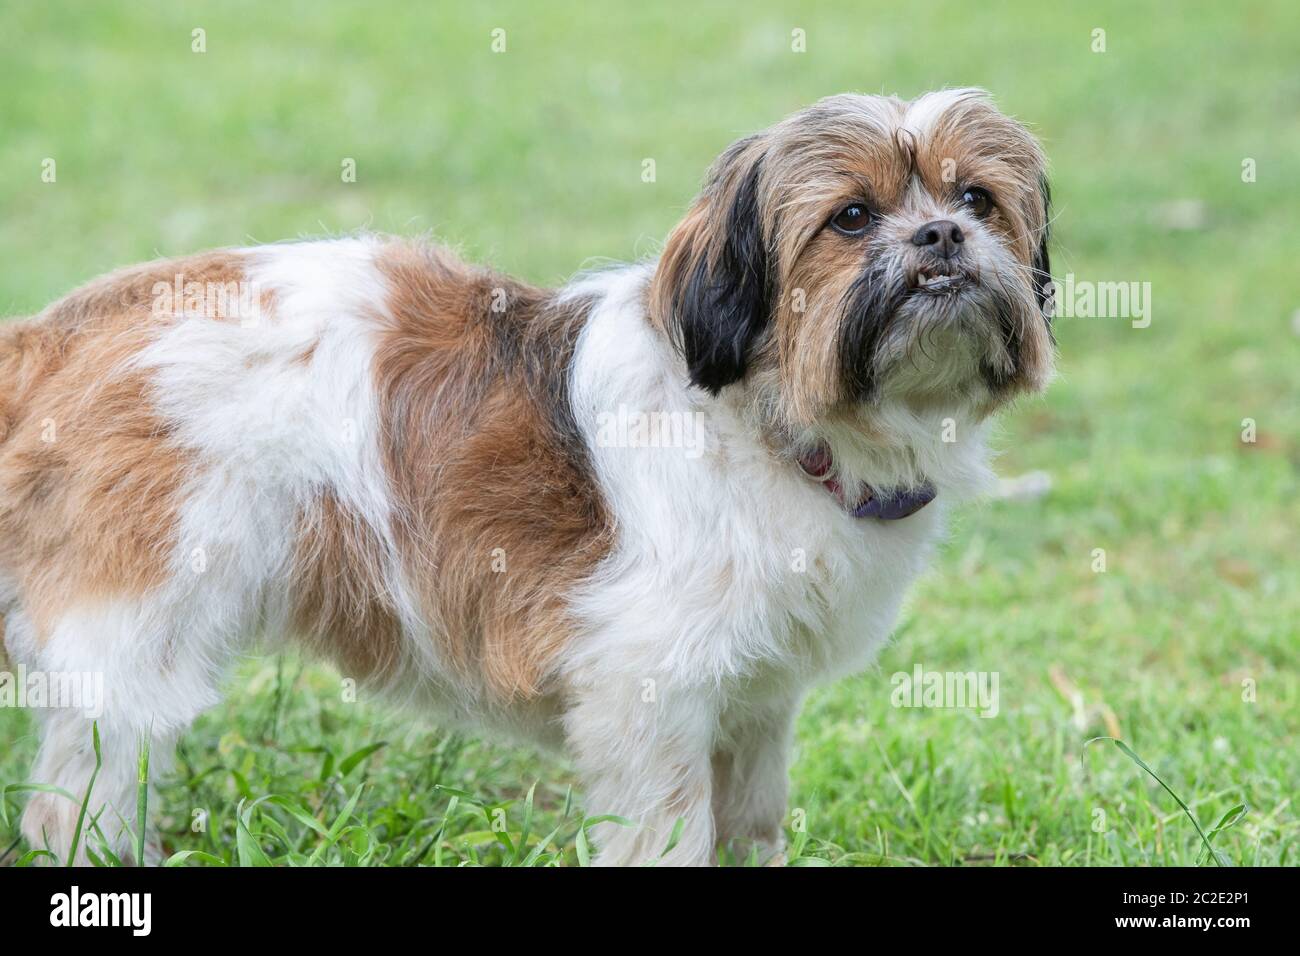 Tzu Cross High Resolution Stock Photography And Images Alamy